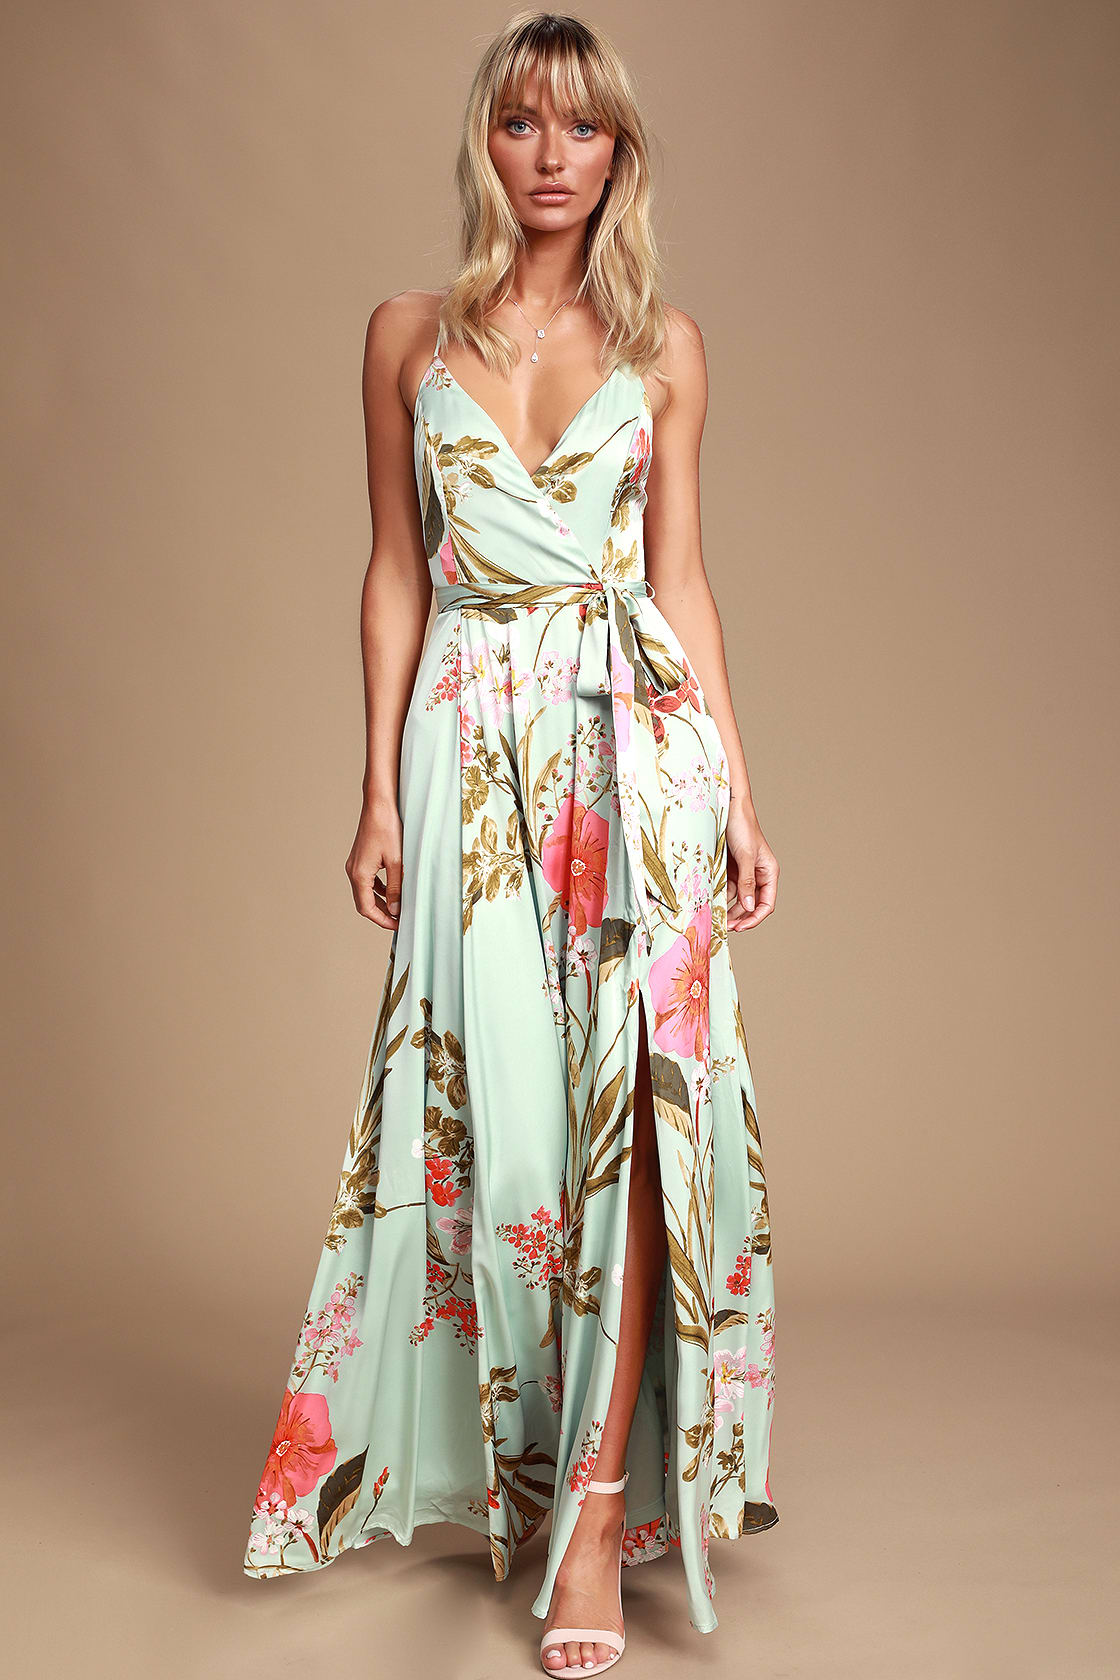 What to Wear to a Wedding in Mexico: Green Floral Dress